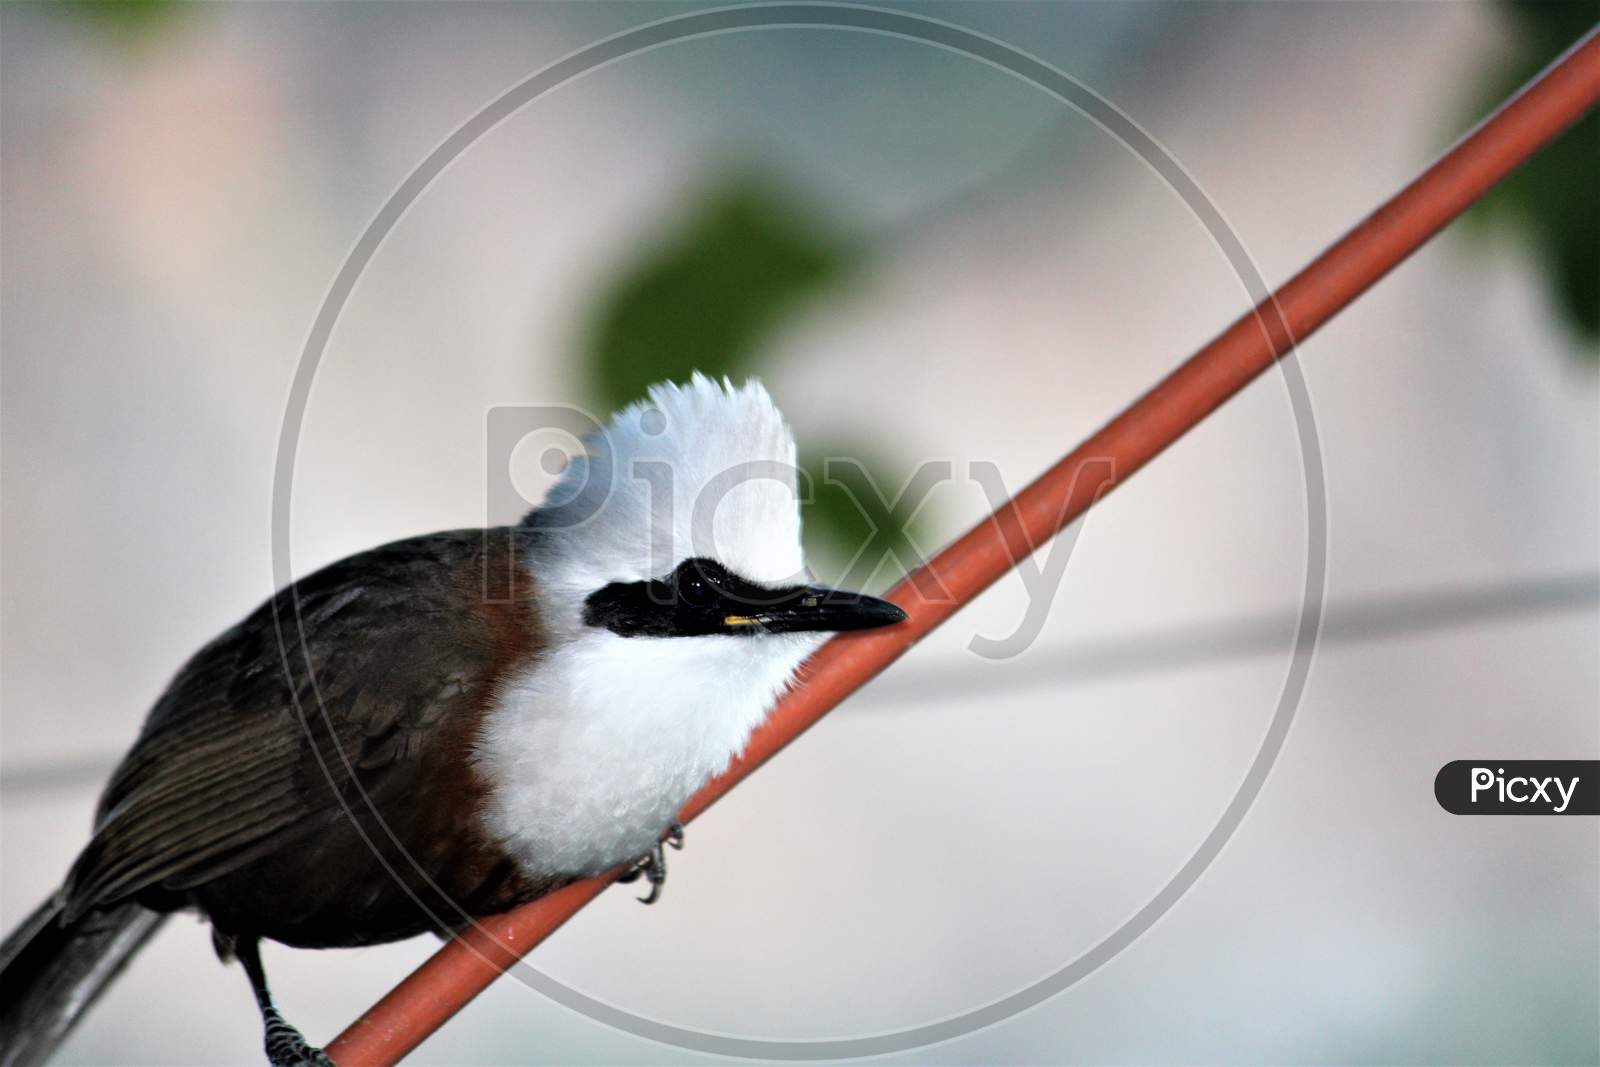 The white-crested laughingthrush bird